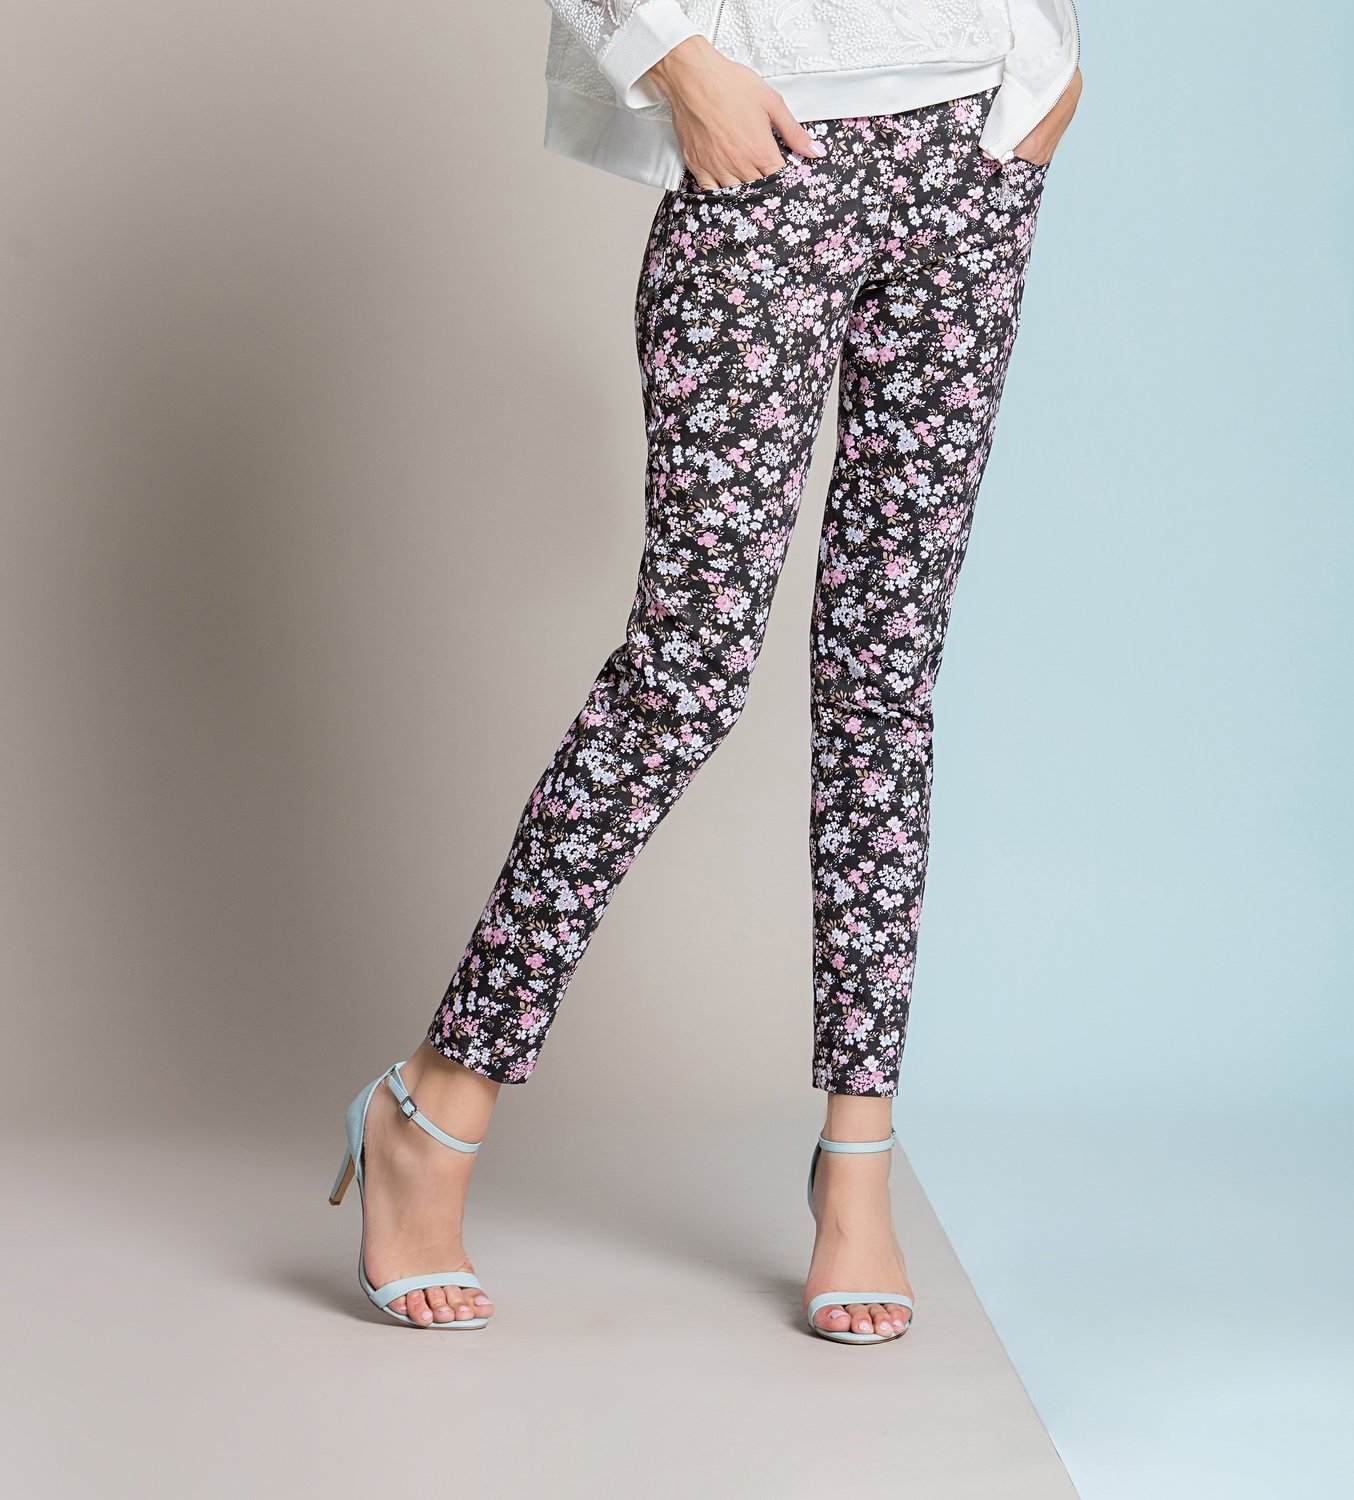 Paul Brial: Blush Flower Princess Seamed Cotton Pocket Pant SOLD OUT